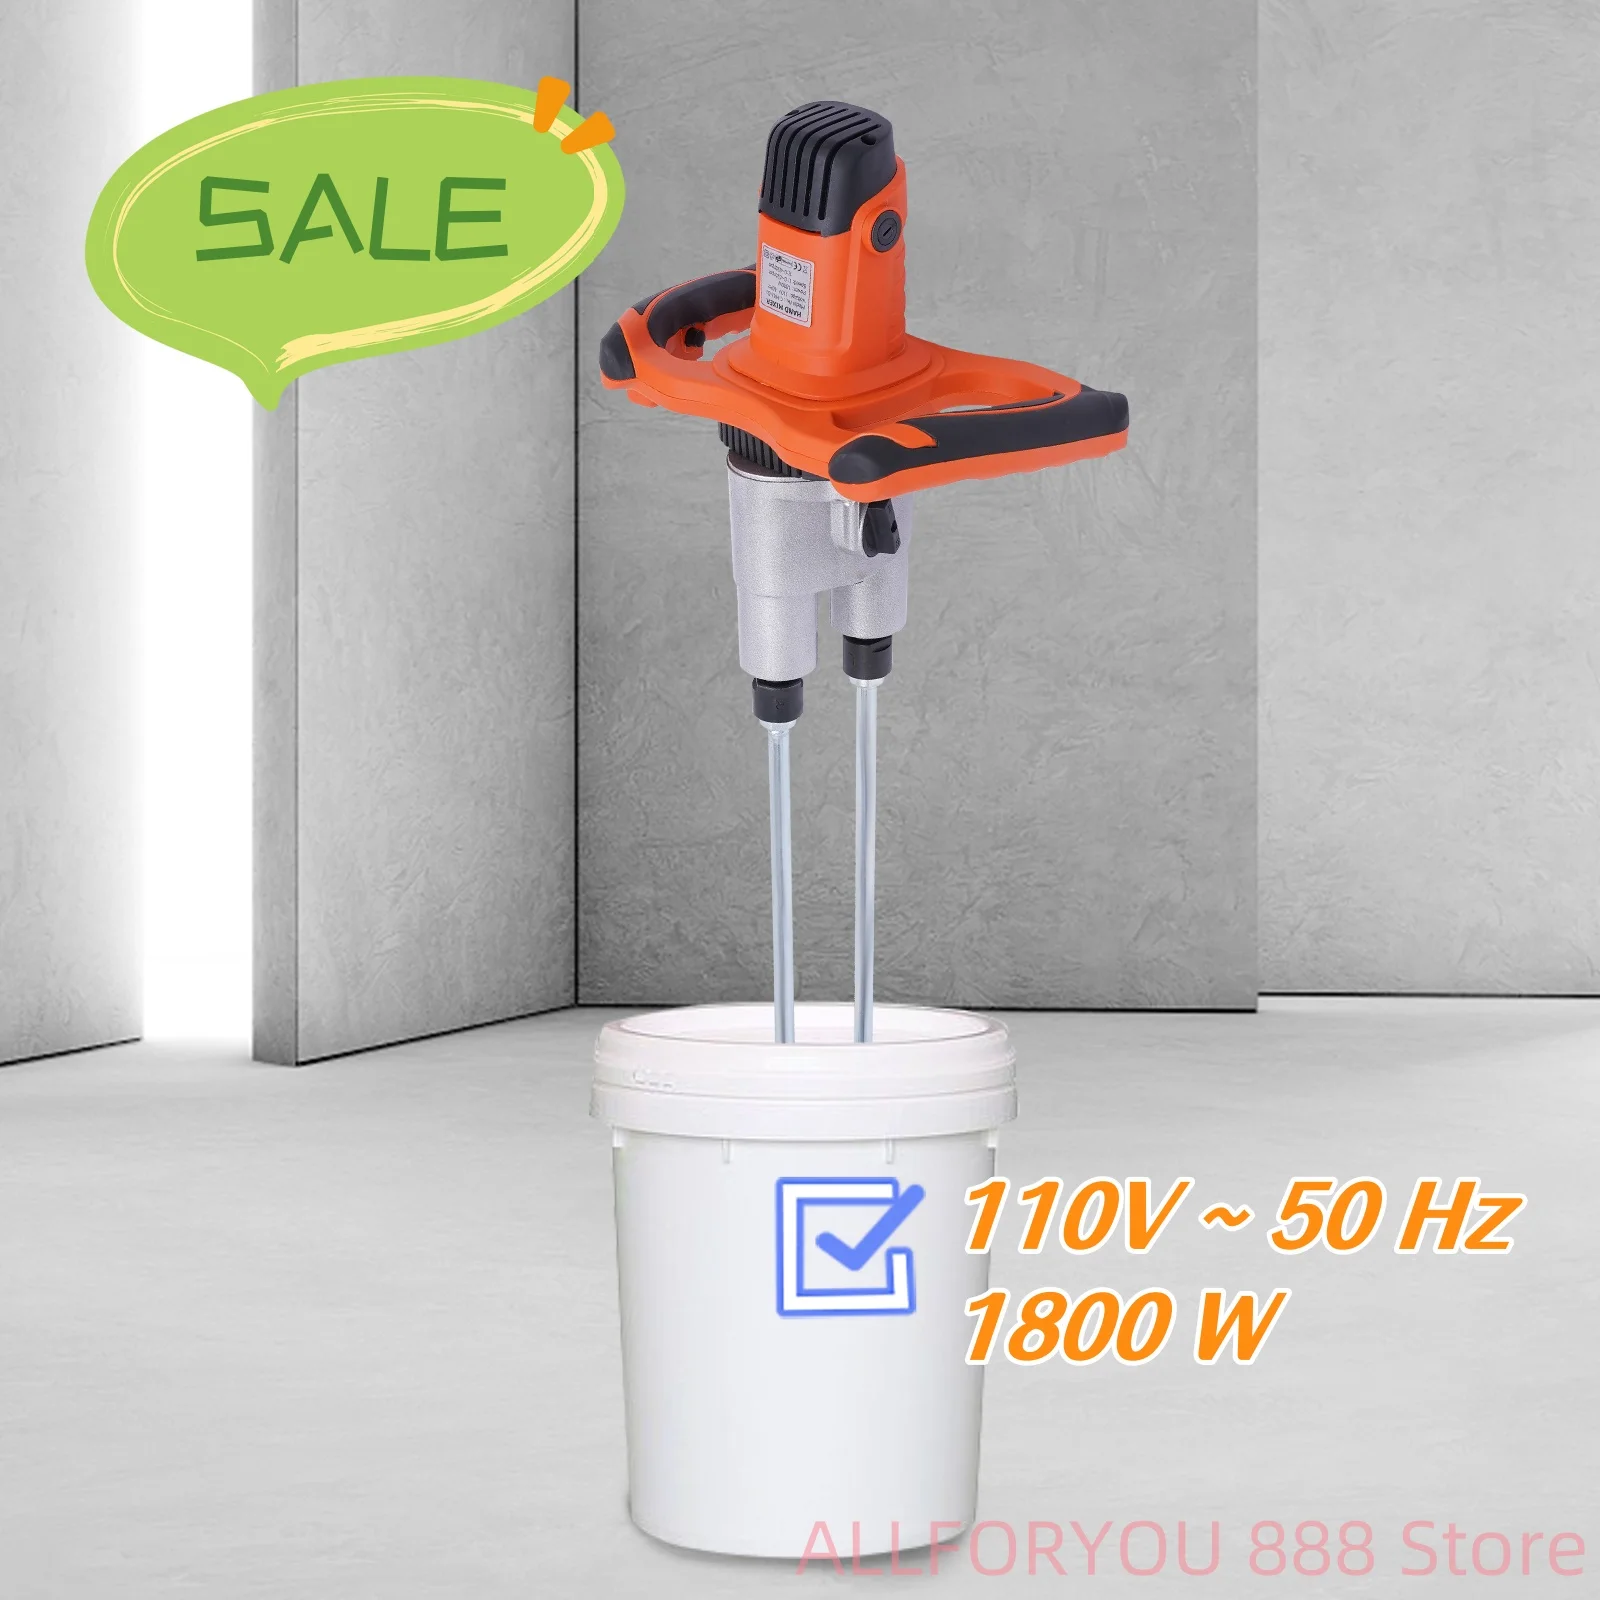 1800W Double Paddle Electric Mortar Mixer 2 Speed with Robust Aluminum Die-cast Housing Powerful and Handy high temperature heater hot melt 20 w handy glue gun with 50 glue sticks graft tool repair gun guns hot silicone glue